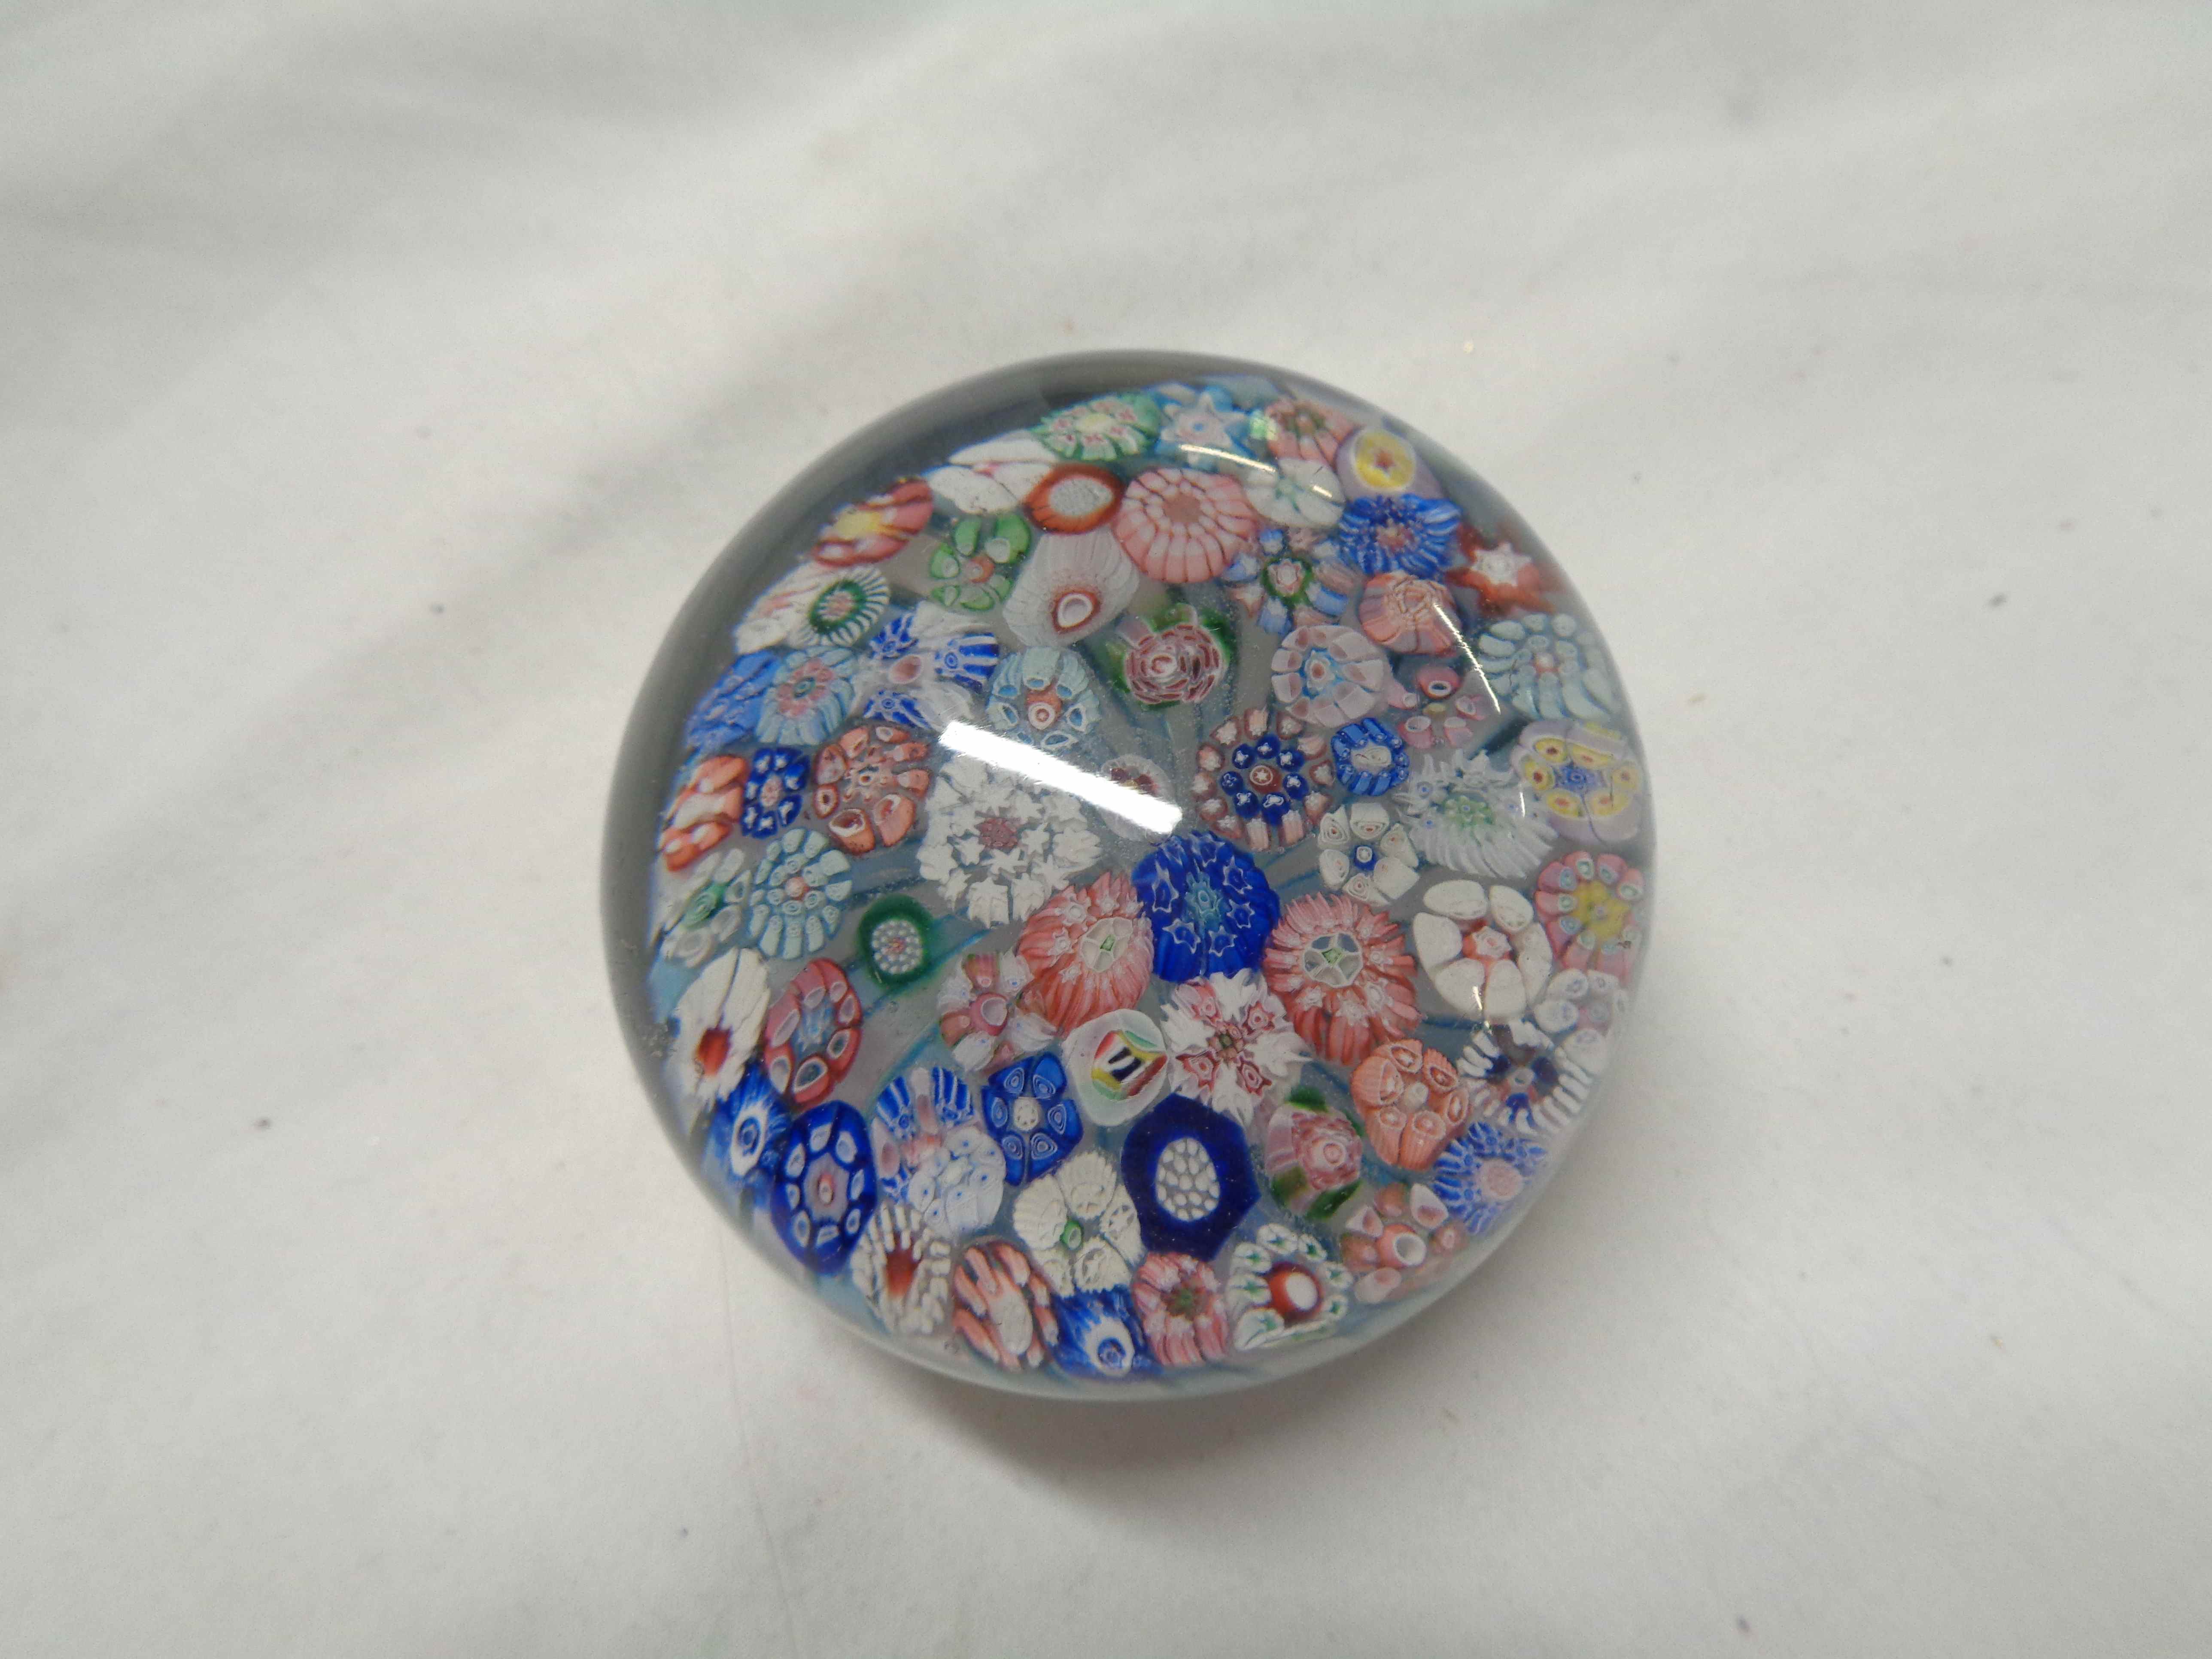 A 19th Century French glass paperweight with millefiori cane decoration on a white and blue swirl